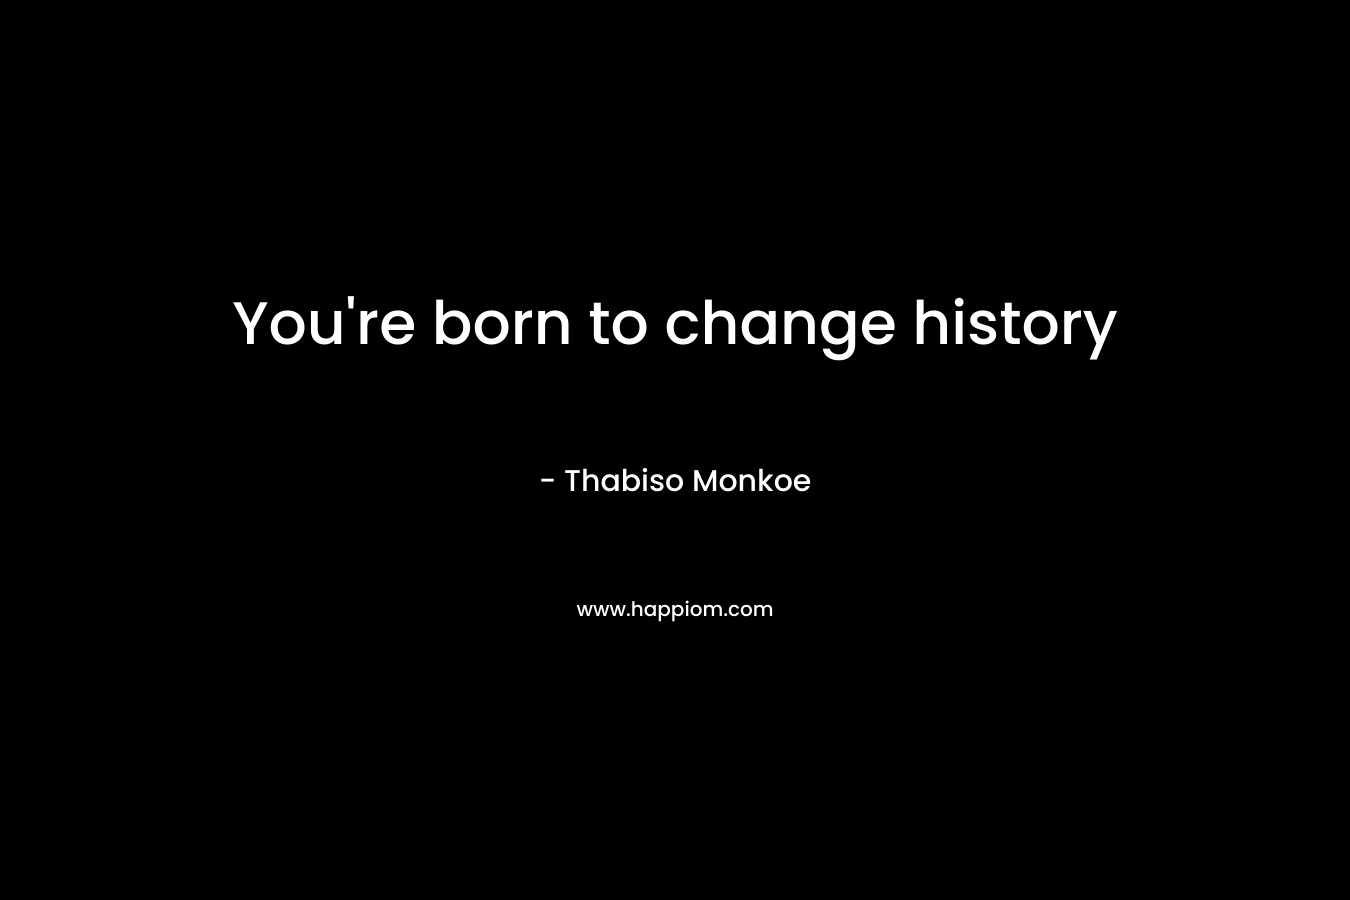 You're born to change history